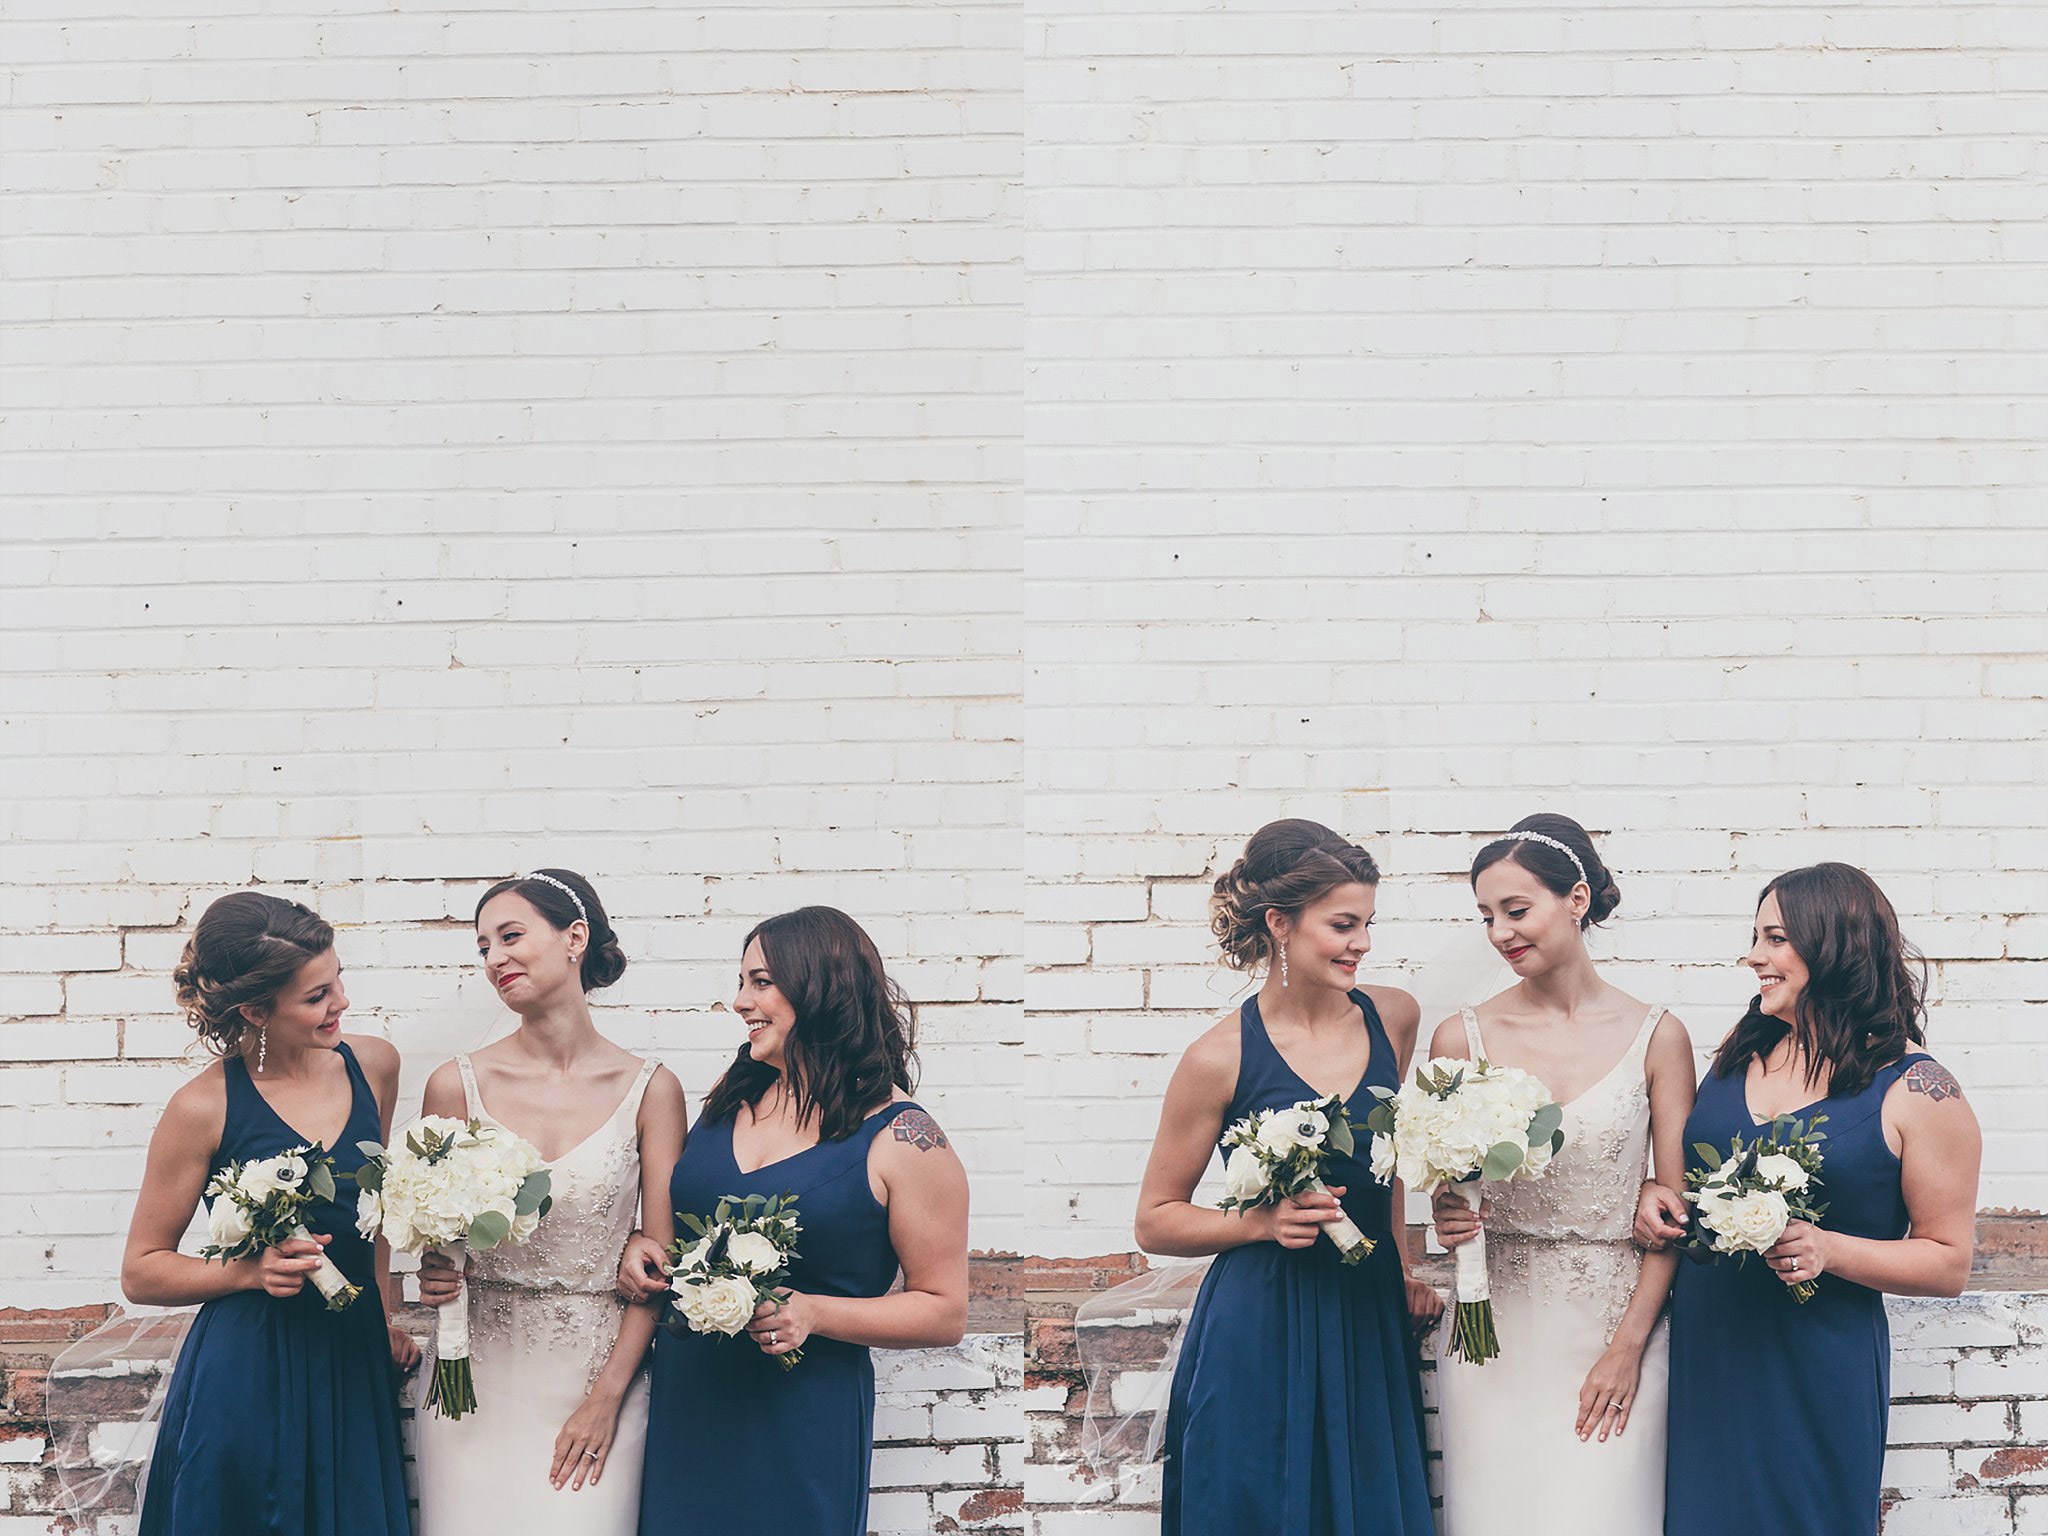 Bride and bridesmaids with navy dresses laughing against a whitewashed brick wall